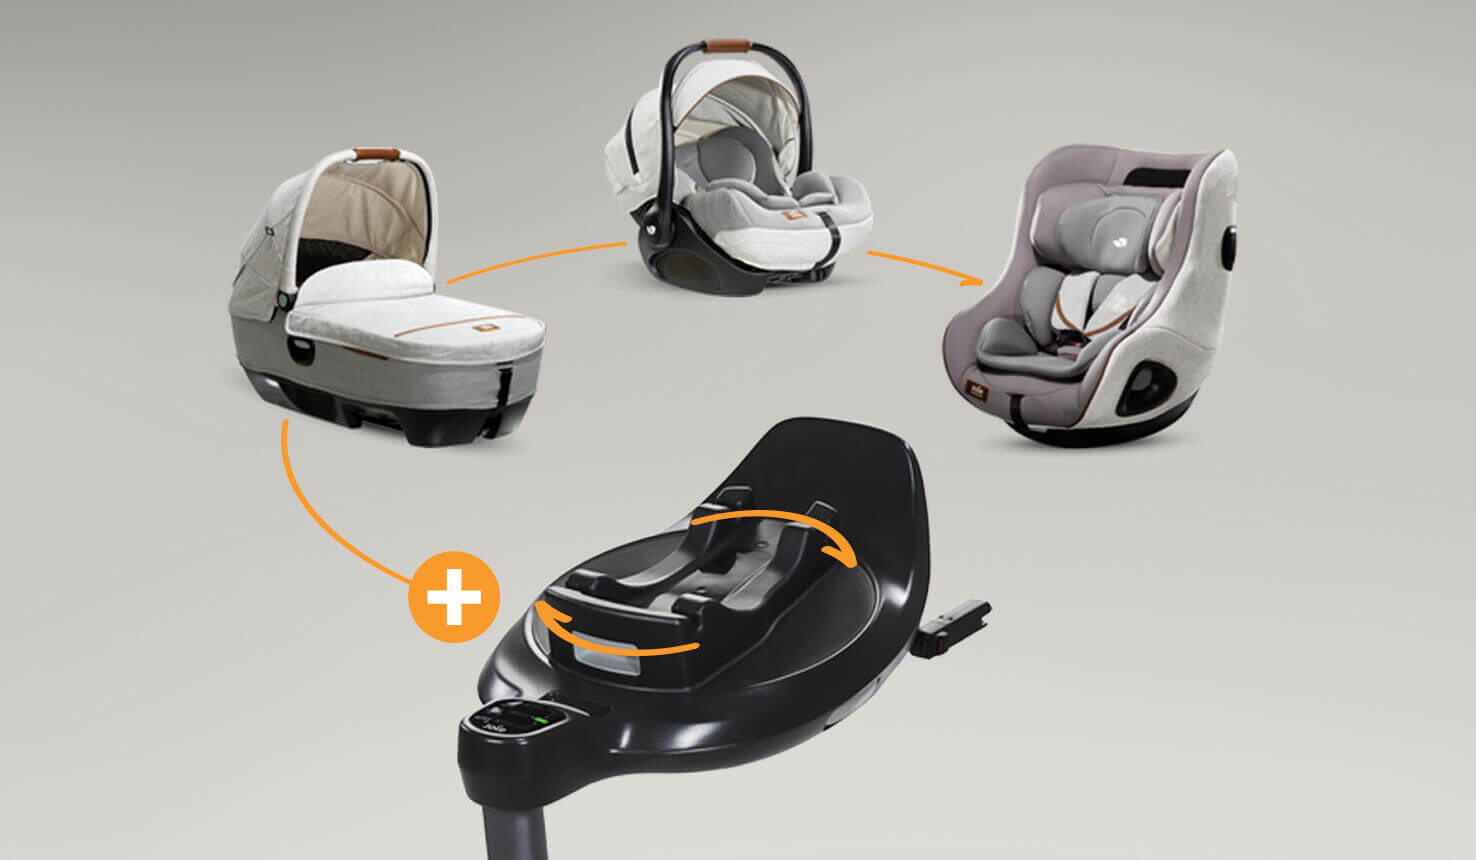 Joie i-Base Encore car seat base, calmi R129 car cot, i-Level infant car seat, and i-Harbour toddler car seat arranged in a circle.